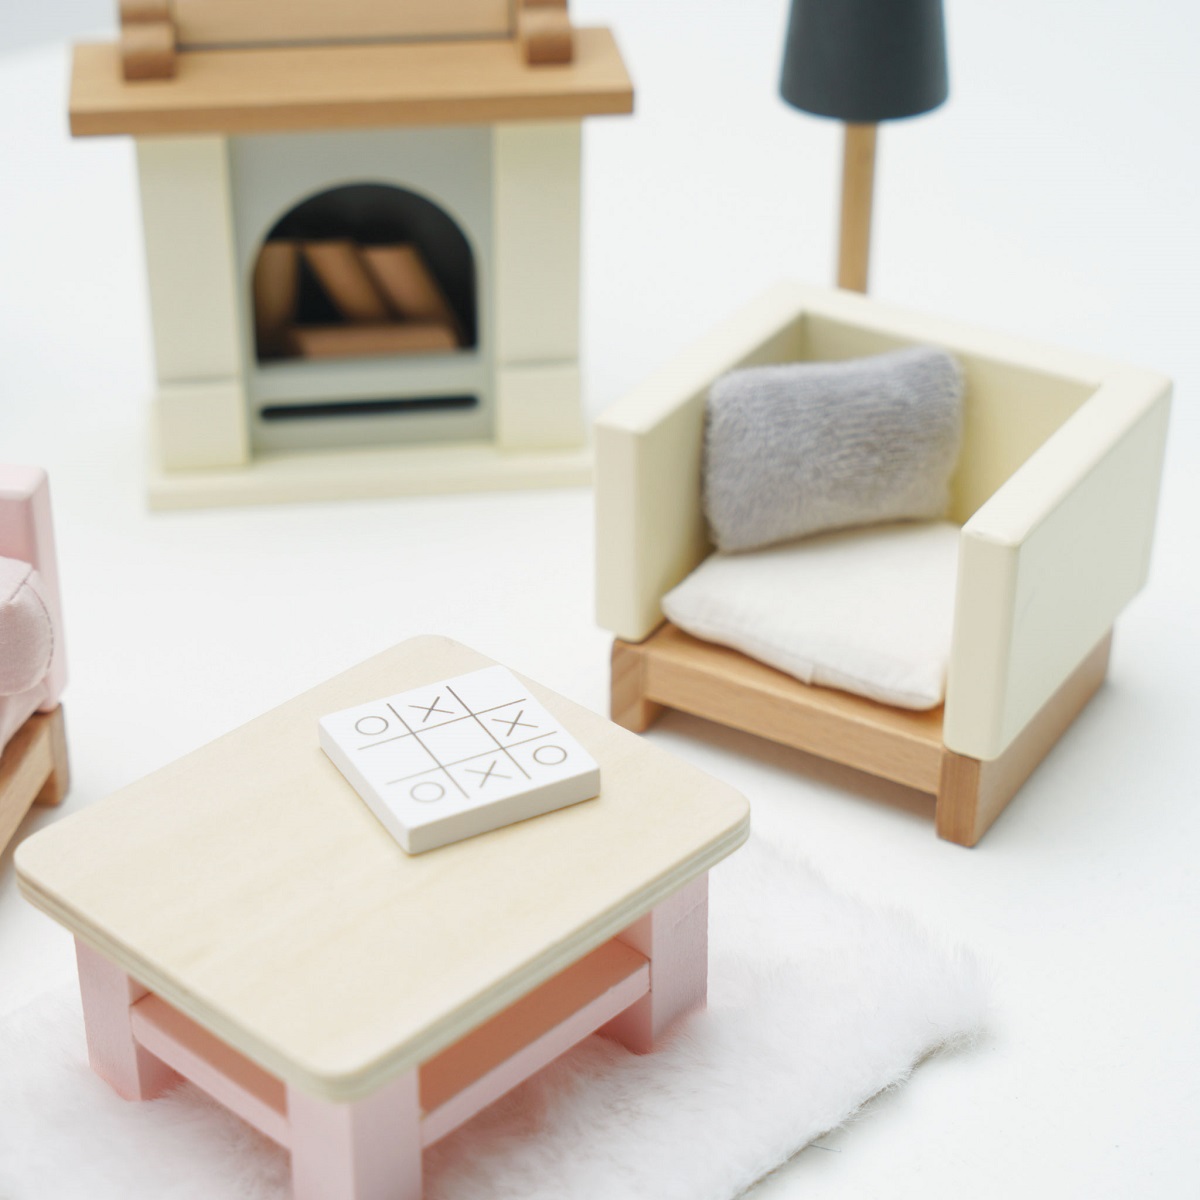 Doll House Furniture - Living Room 